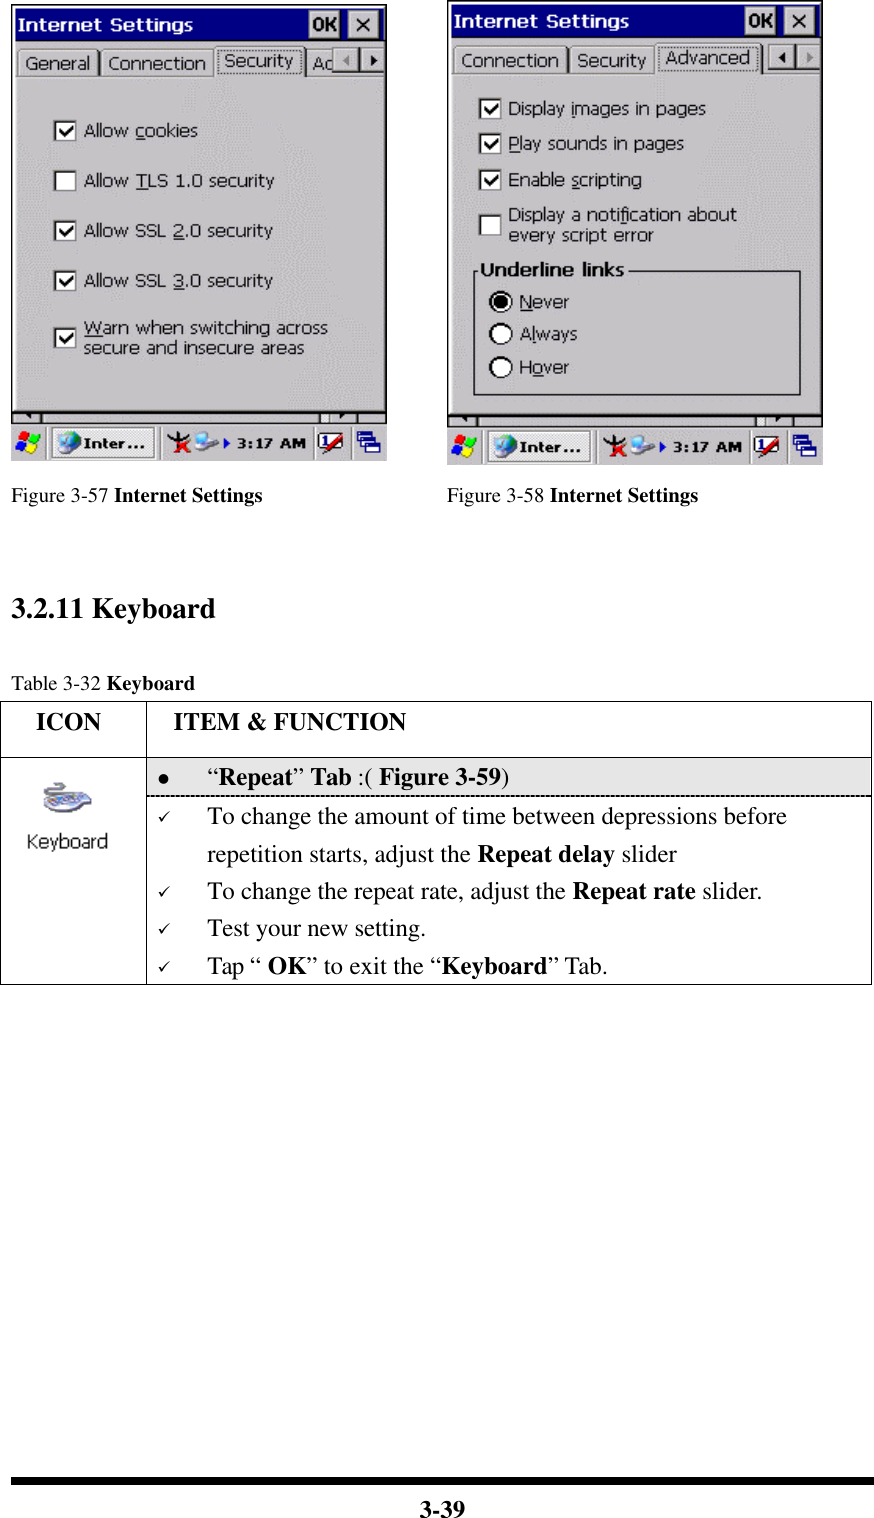  3-39   Figure 3-57 Internet Settings Figure 3-58 Internet Settings   3.2.11 Keyboard  Table 3-32 Keyboard   ICON  ITEM &amp; FUNCTION l “Repeat” Tab :( Figure 3-59)    ü To change the amount of time between depressions before repetition starts, adjust the Repeat delay slider ü To change the repeat rate, adjust the Repeat rate slider. ü Test your new setting. ü Tap “ OK” to exit the “Keyboard” Tab. 